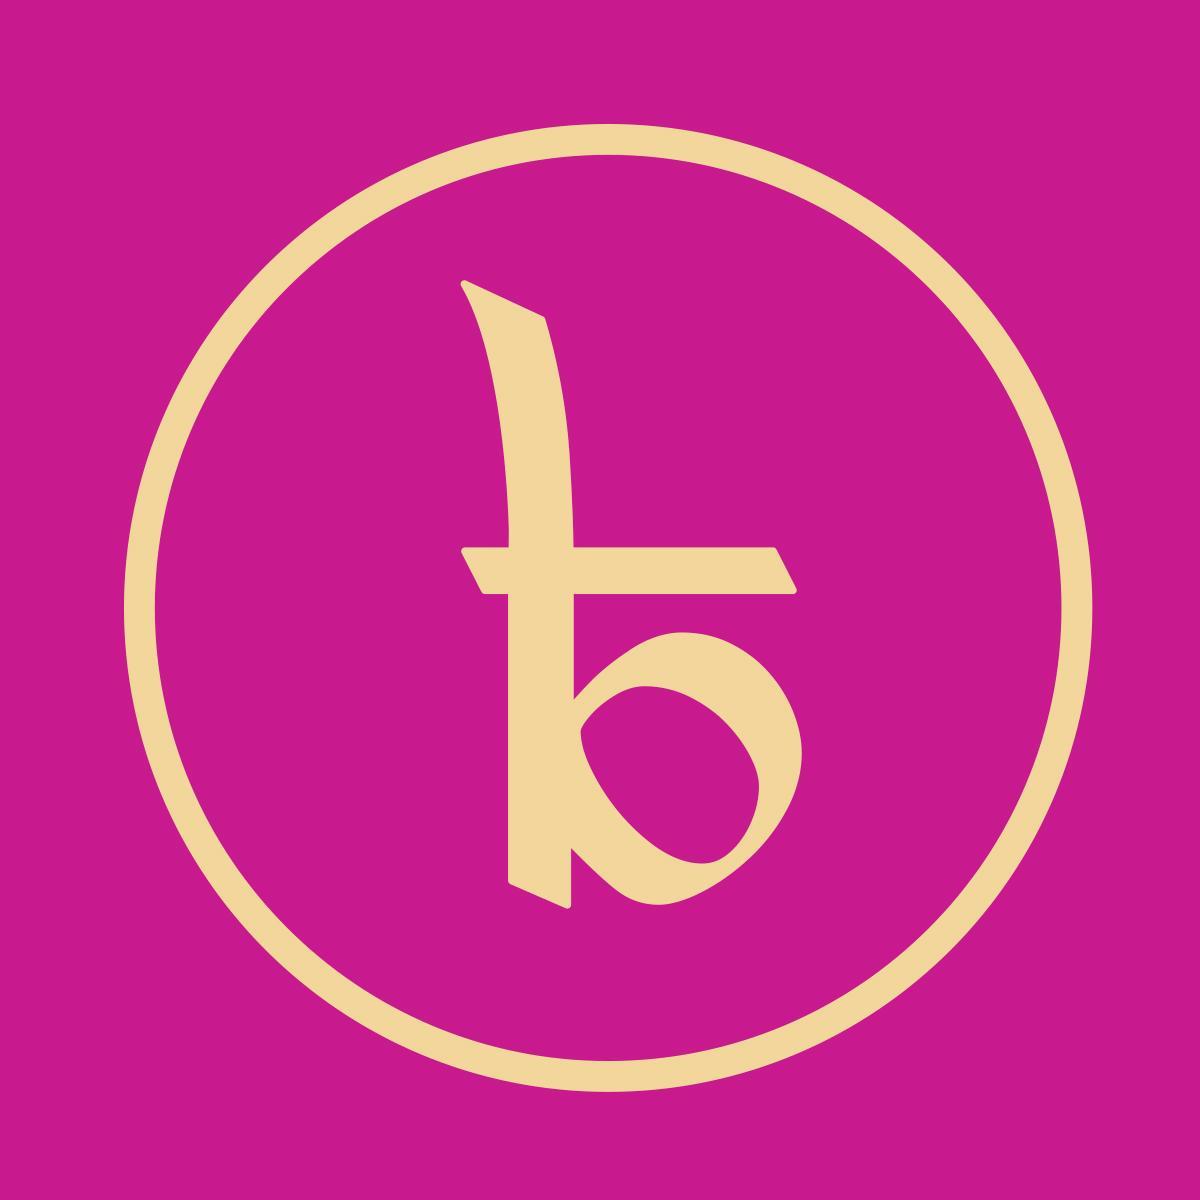 Official Bombay Brow Bar Twitter. Our mission is to educate, inspire and fulfill the promise of spreading love through beauty.™